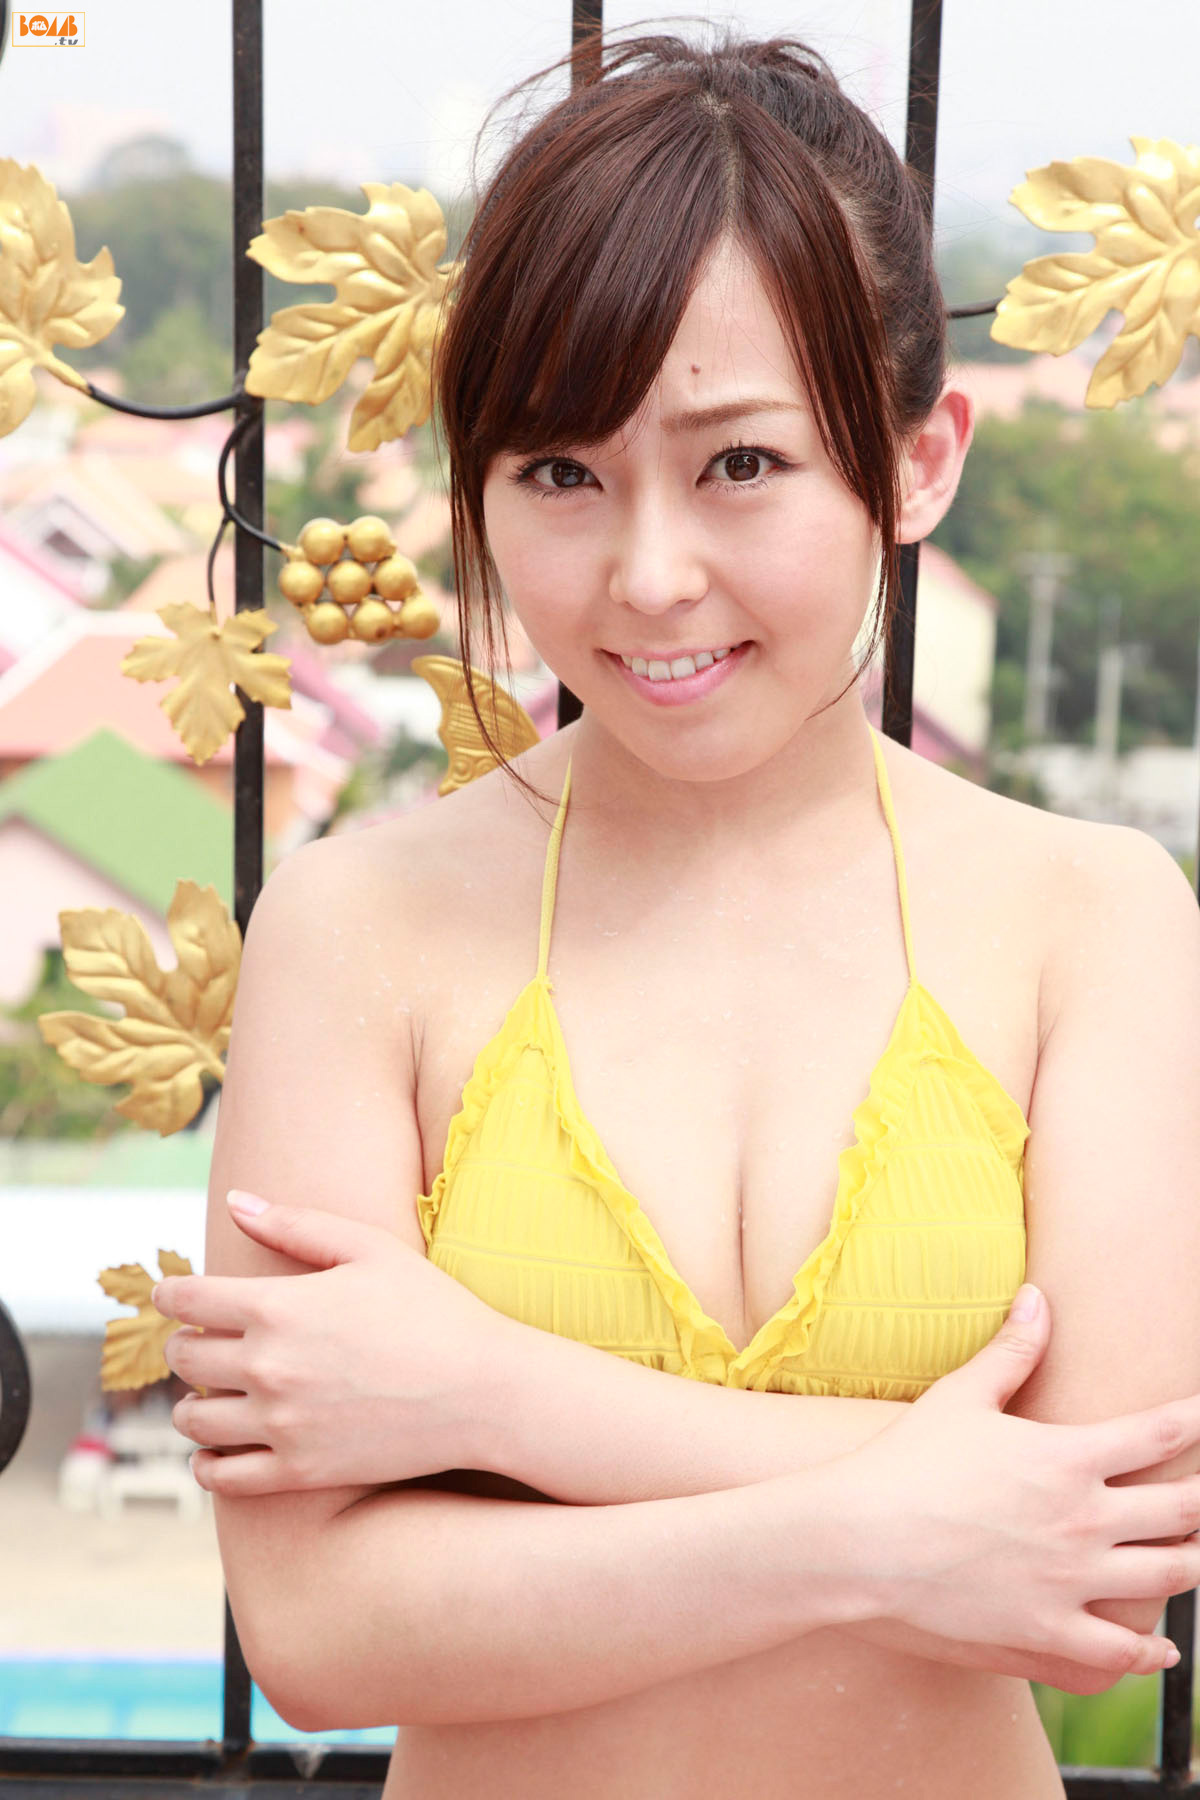 Japanese Beauty Collection July 2011 part1 Bomb.tv  GRavURE